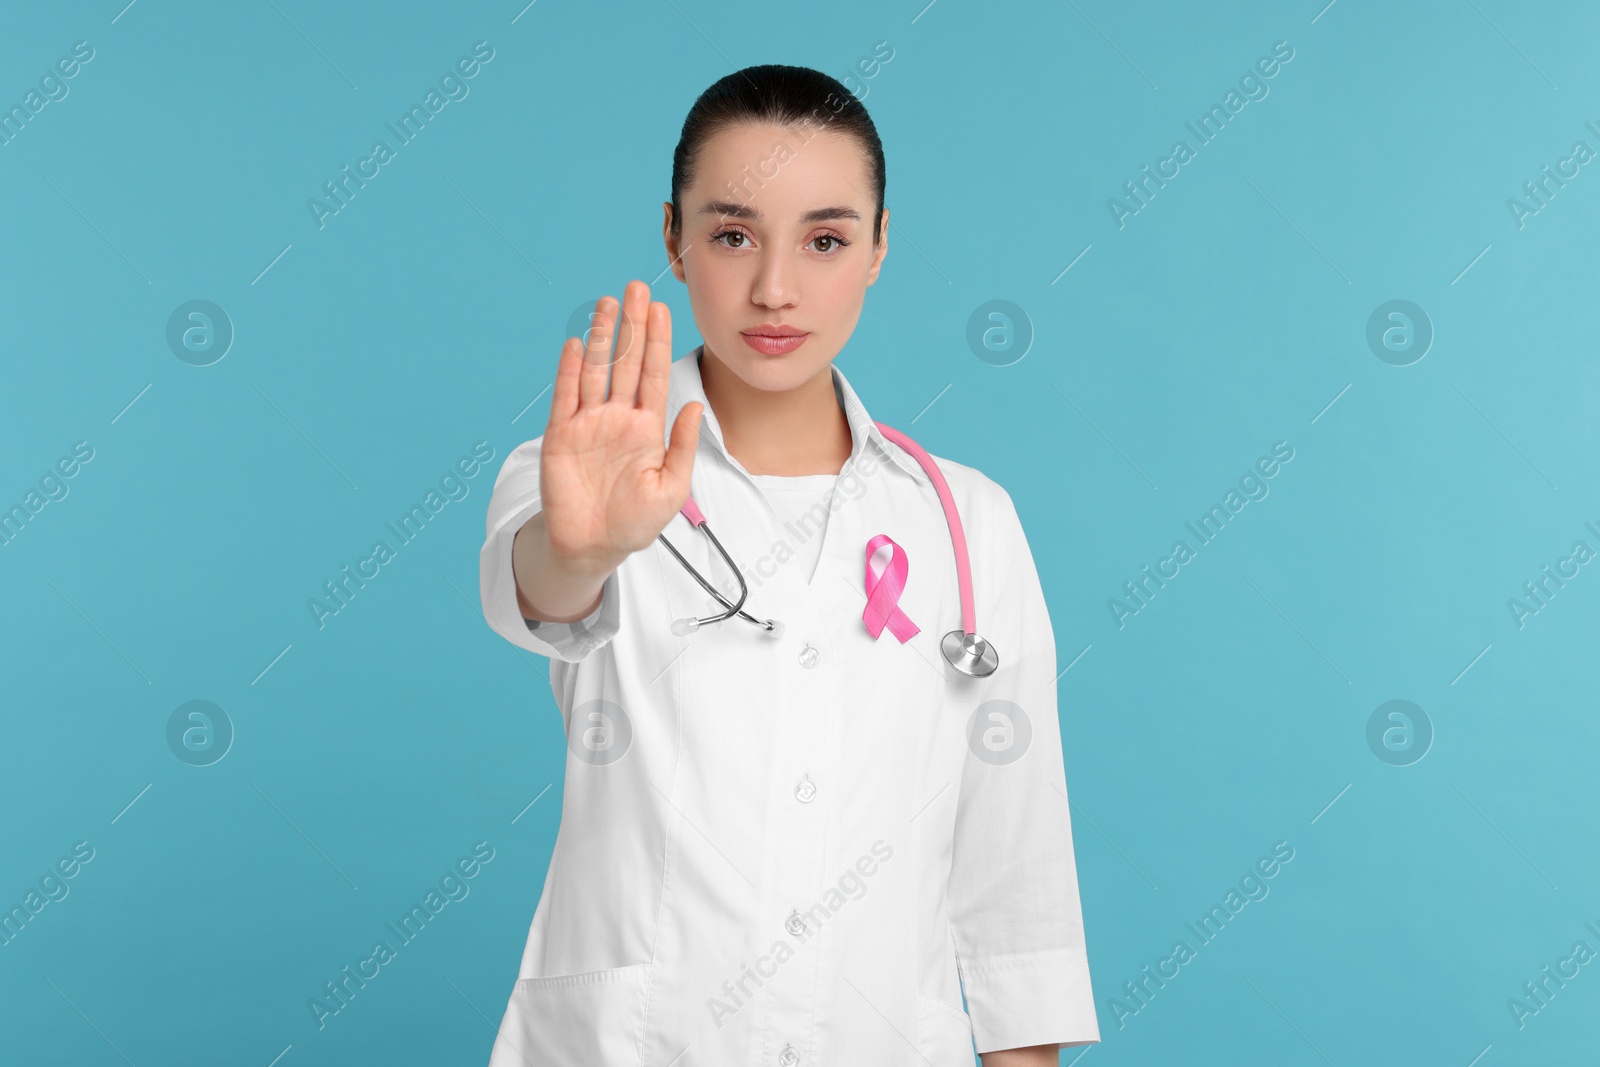 Photo of Mammologist with pink ribbon showing stop gesture on light blue background. Breast cancer awareness